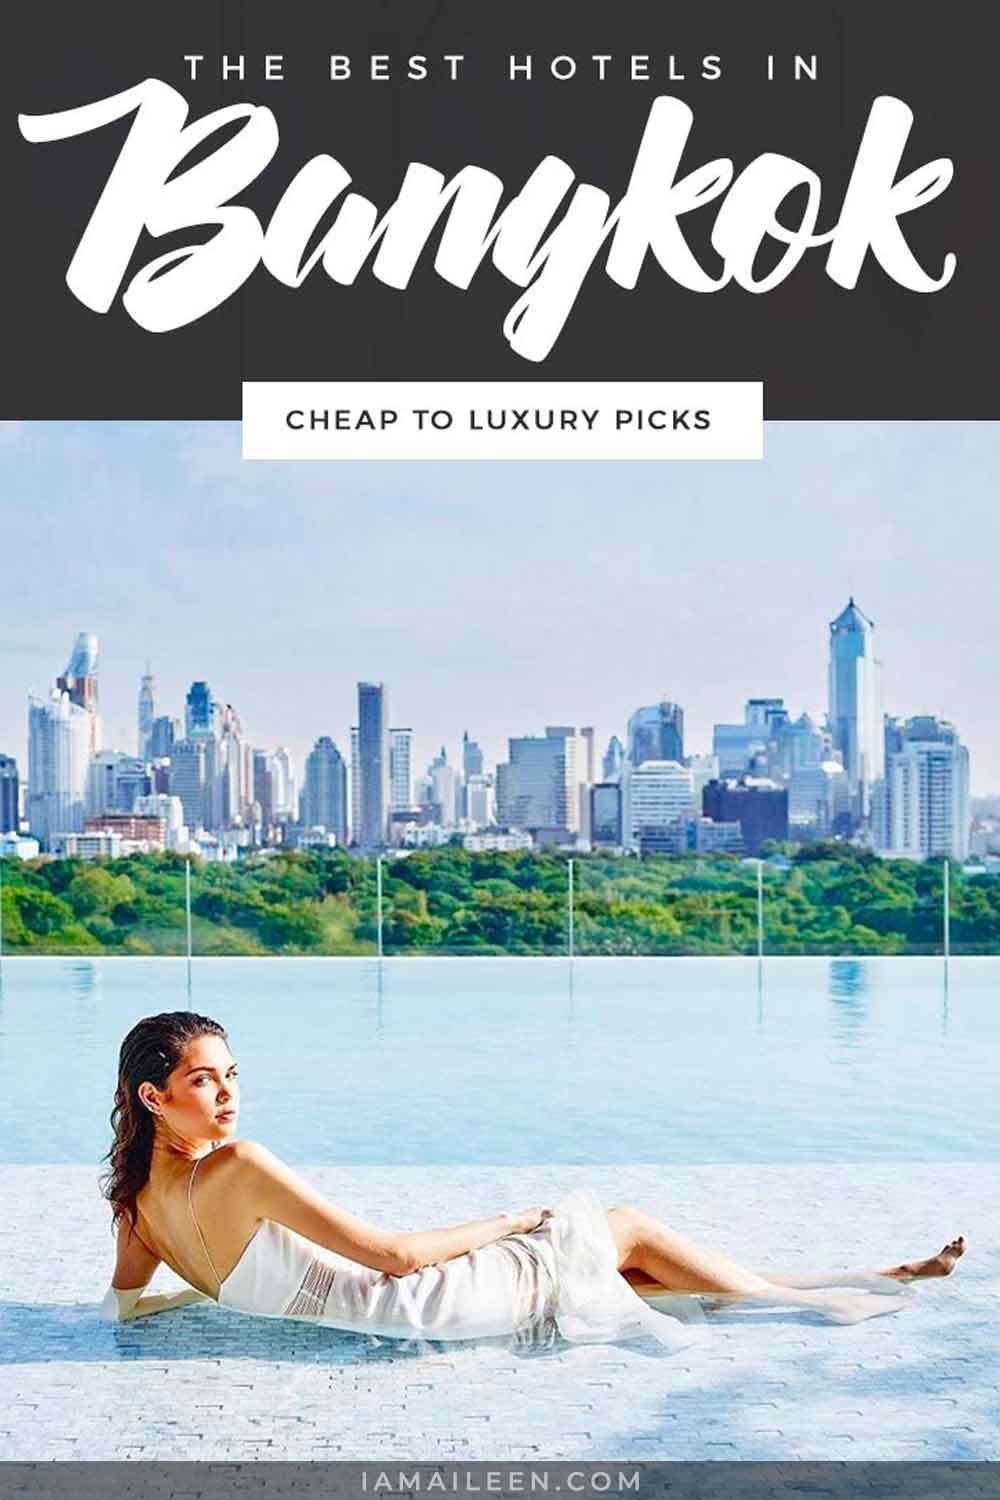 The Best Hotels in Bangkok, Thailand: Cheap to Luxury Picks